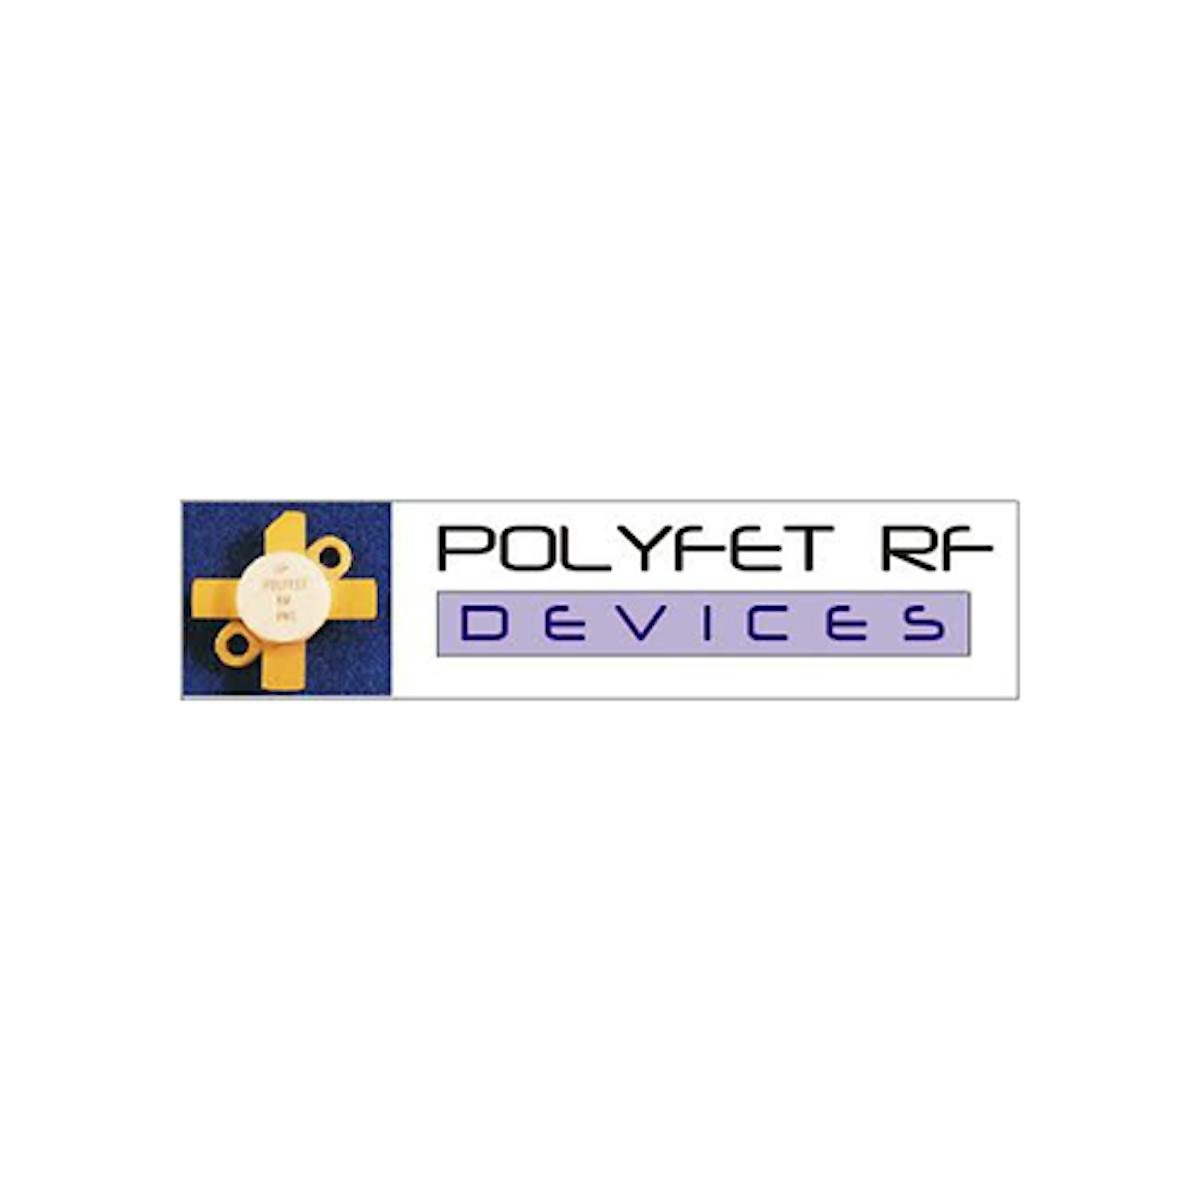 Polyfet Rf Devices